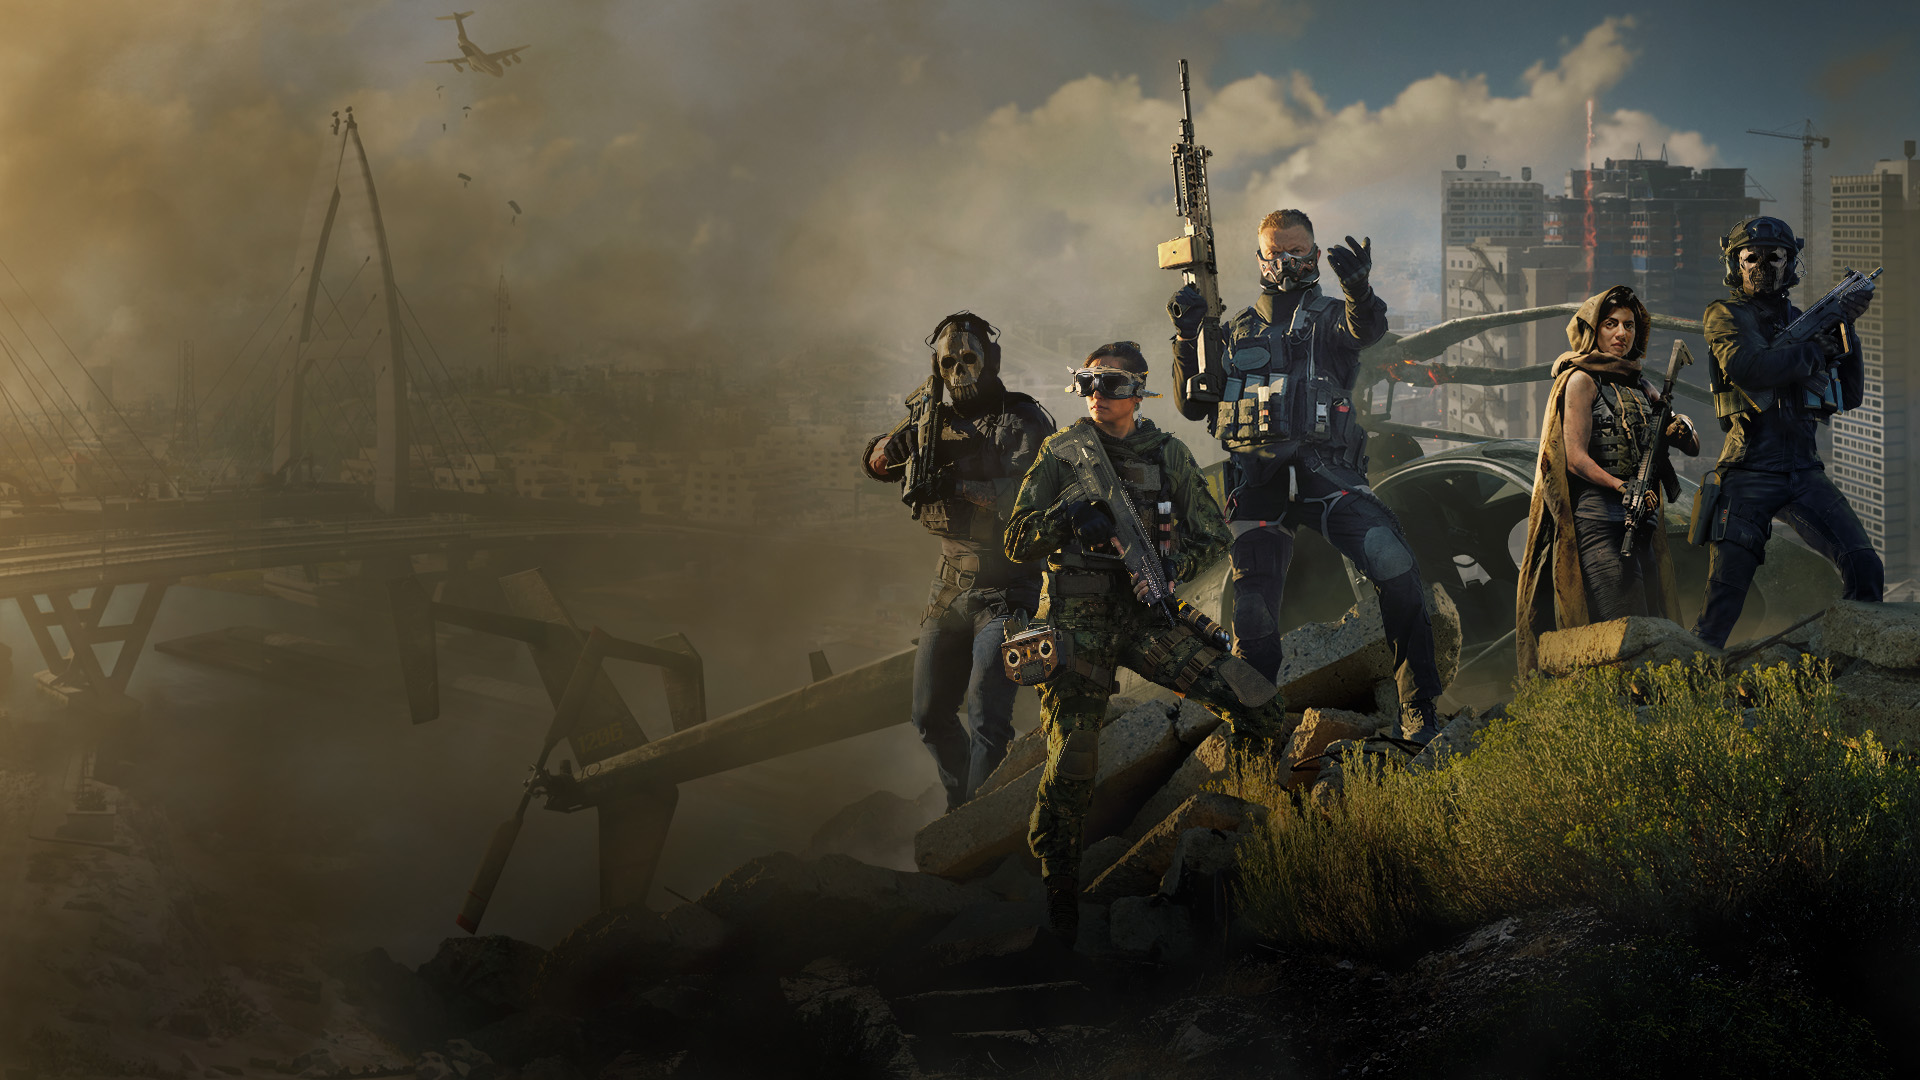 A group of Operators stand on top of a hill, preparing to join the action.